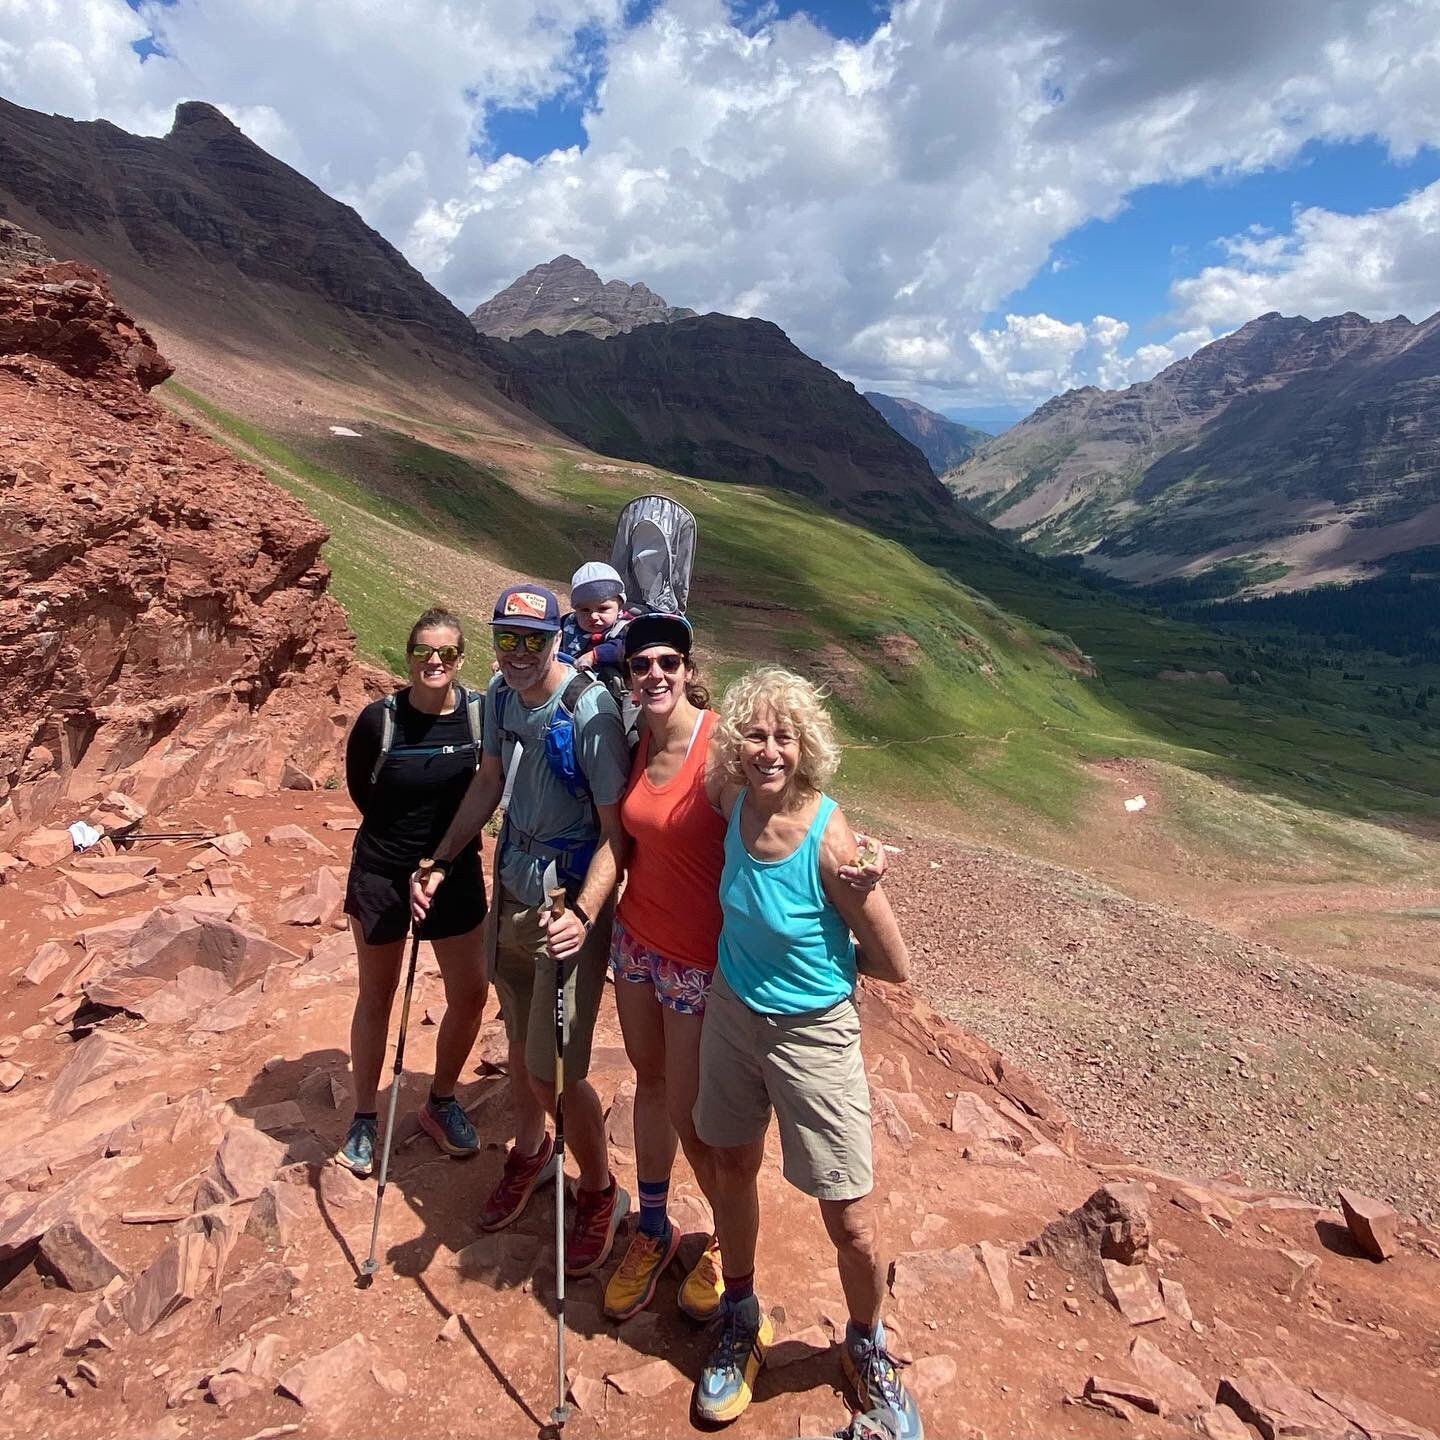 The hike at West Maroon Bells (12,500 ft) was simply epic.